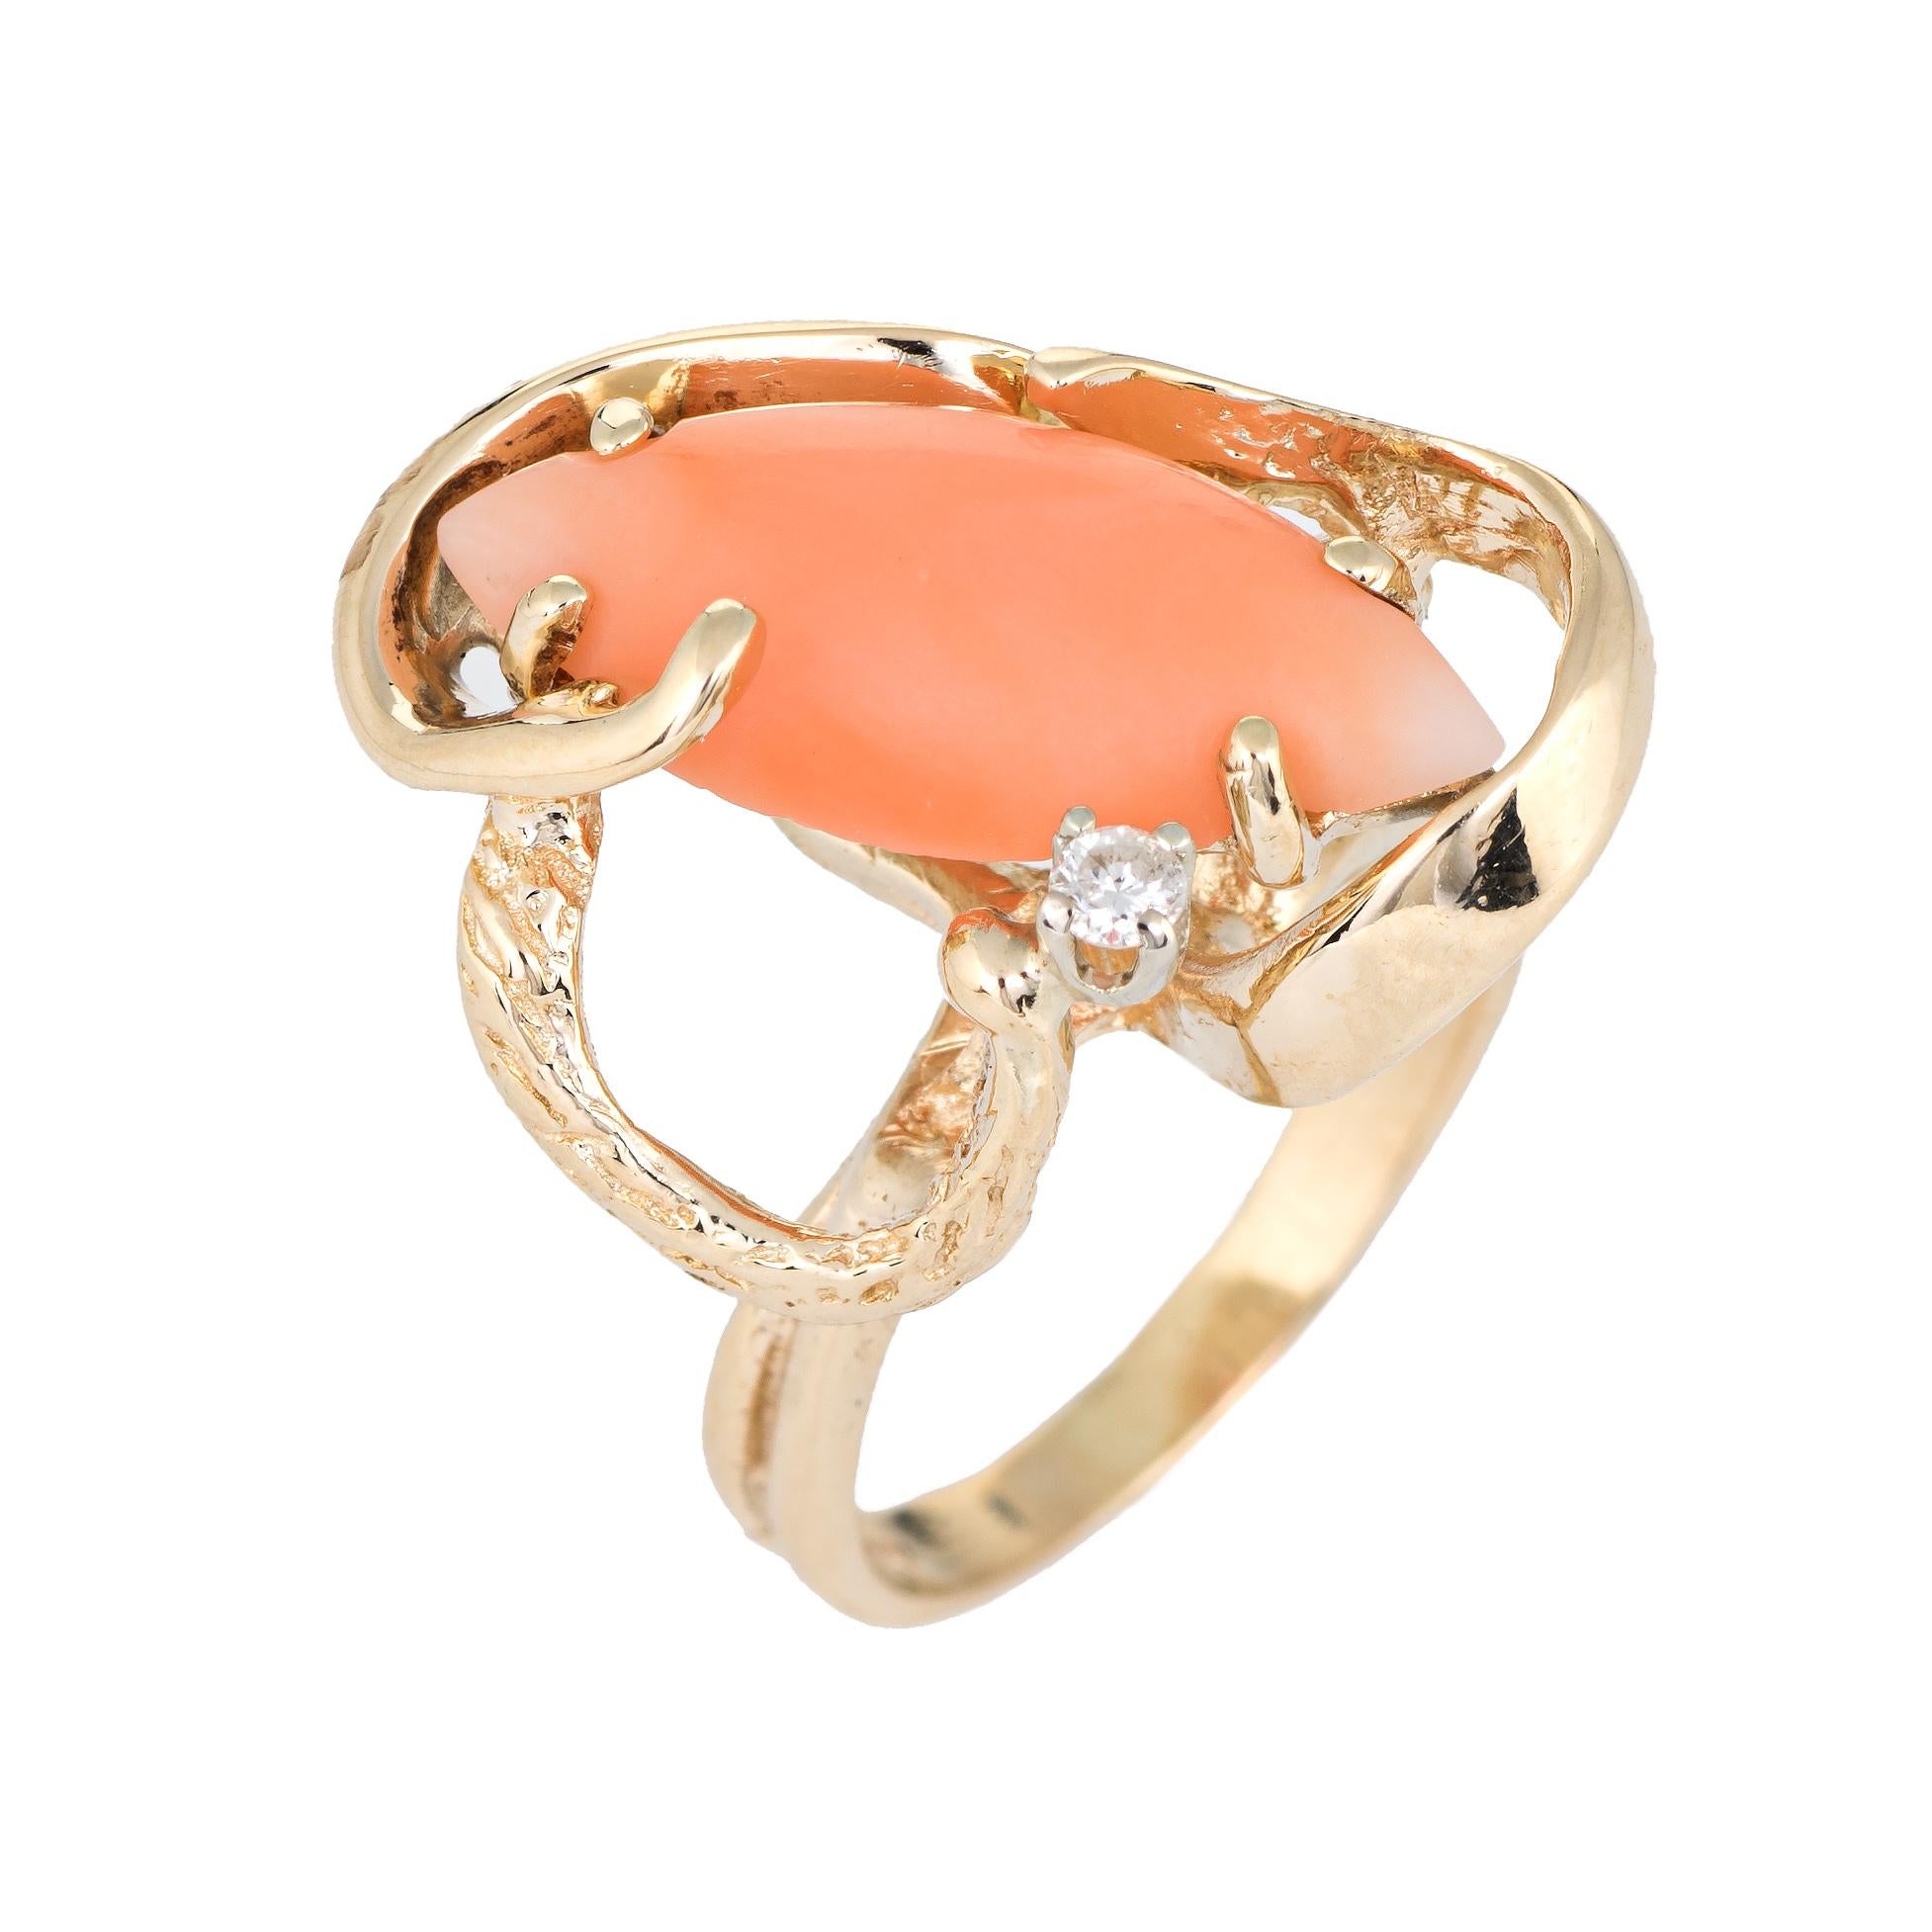 Stylish vintage coral & diamond ring (circa 1960s to 1970s) crafted in 14 karat yellow gold. 

Cabochon cut marquise shaped coral measures 18mm x 8mm (estimated at 4.50 carats), accented with one estimated 0.02 carat diamond (estimated at H-I color